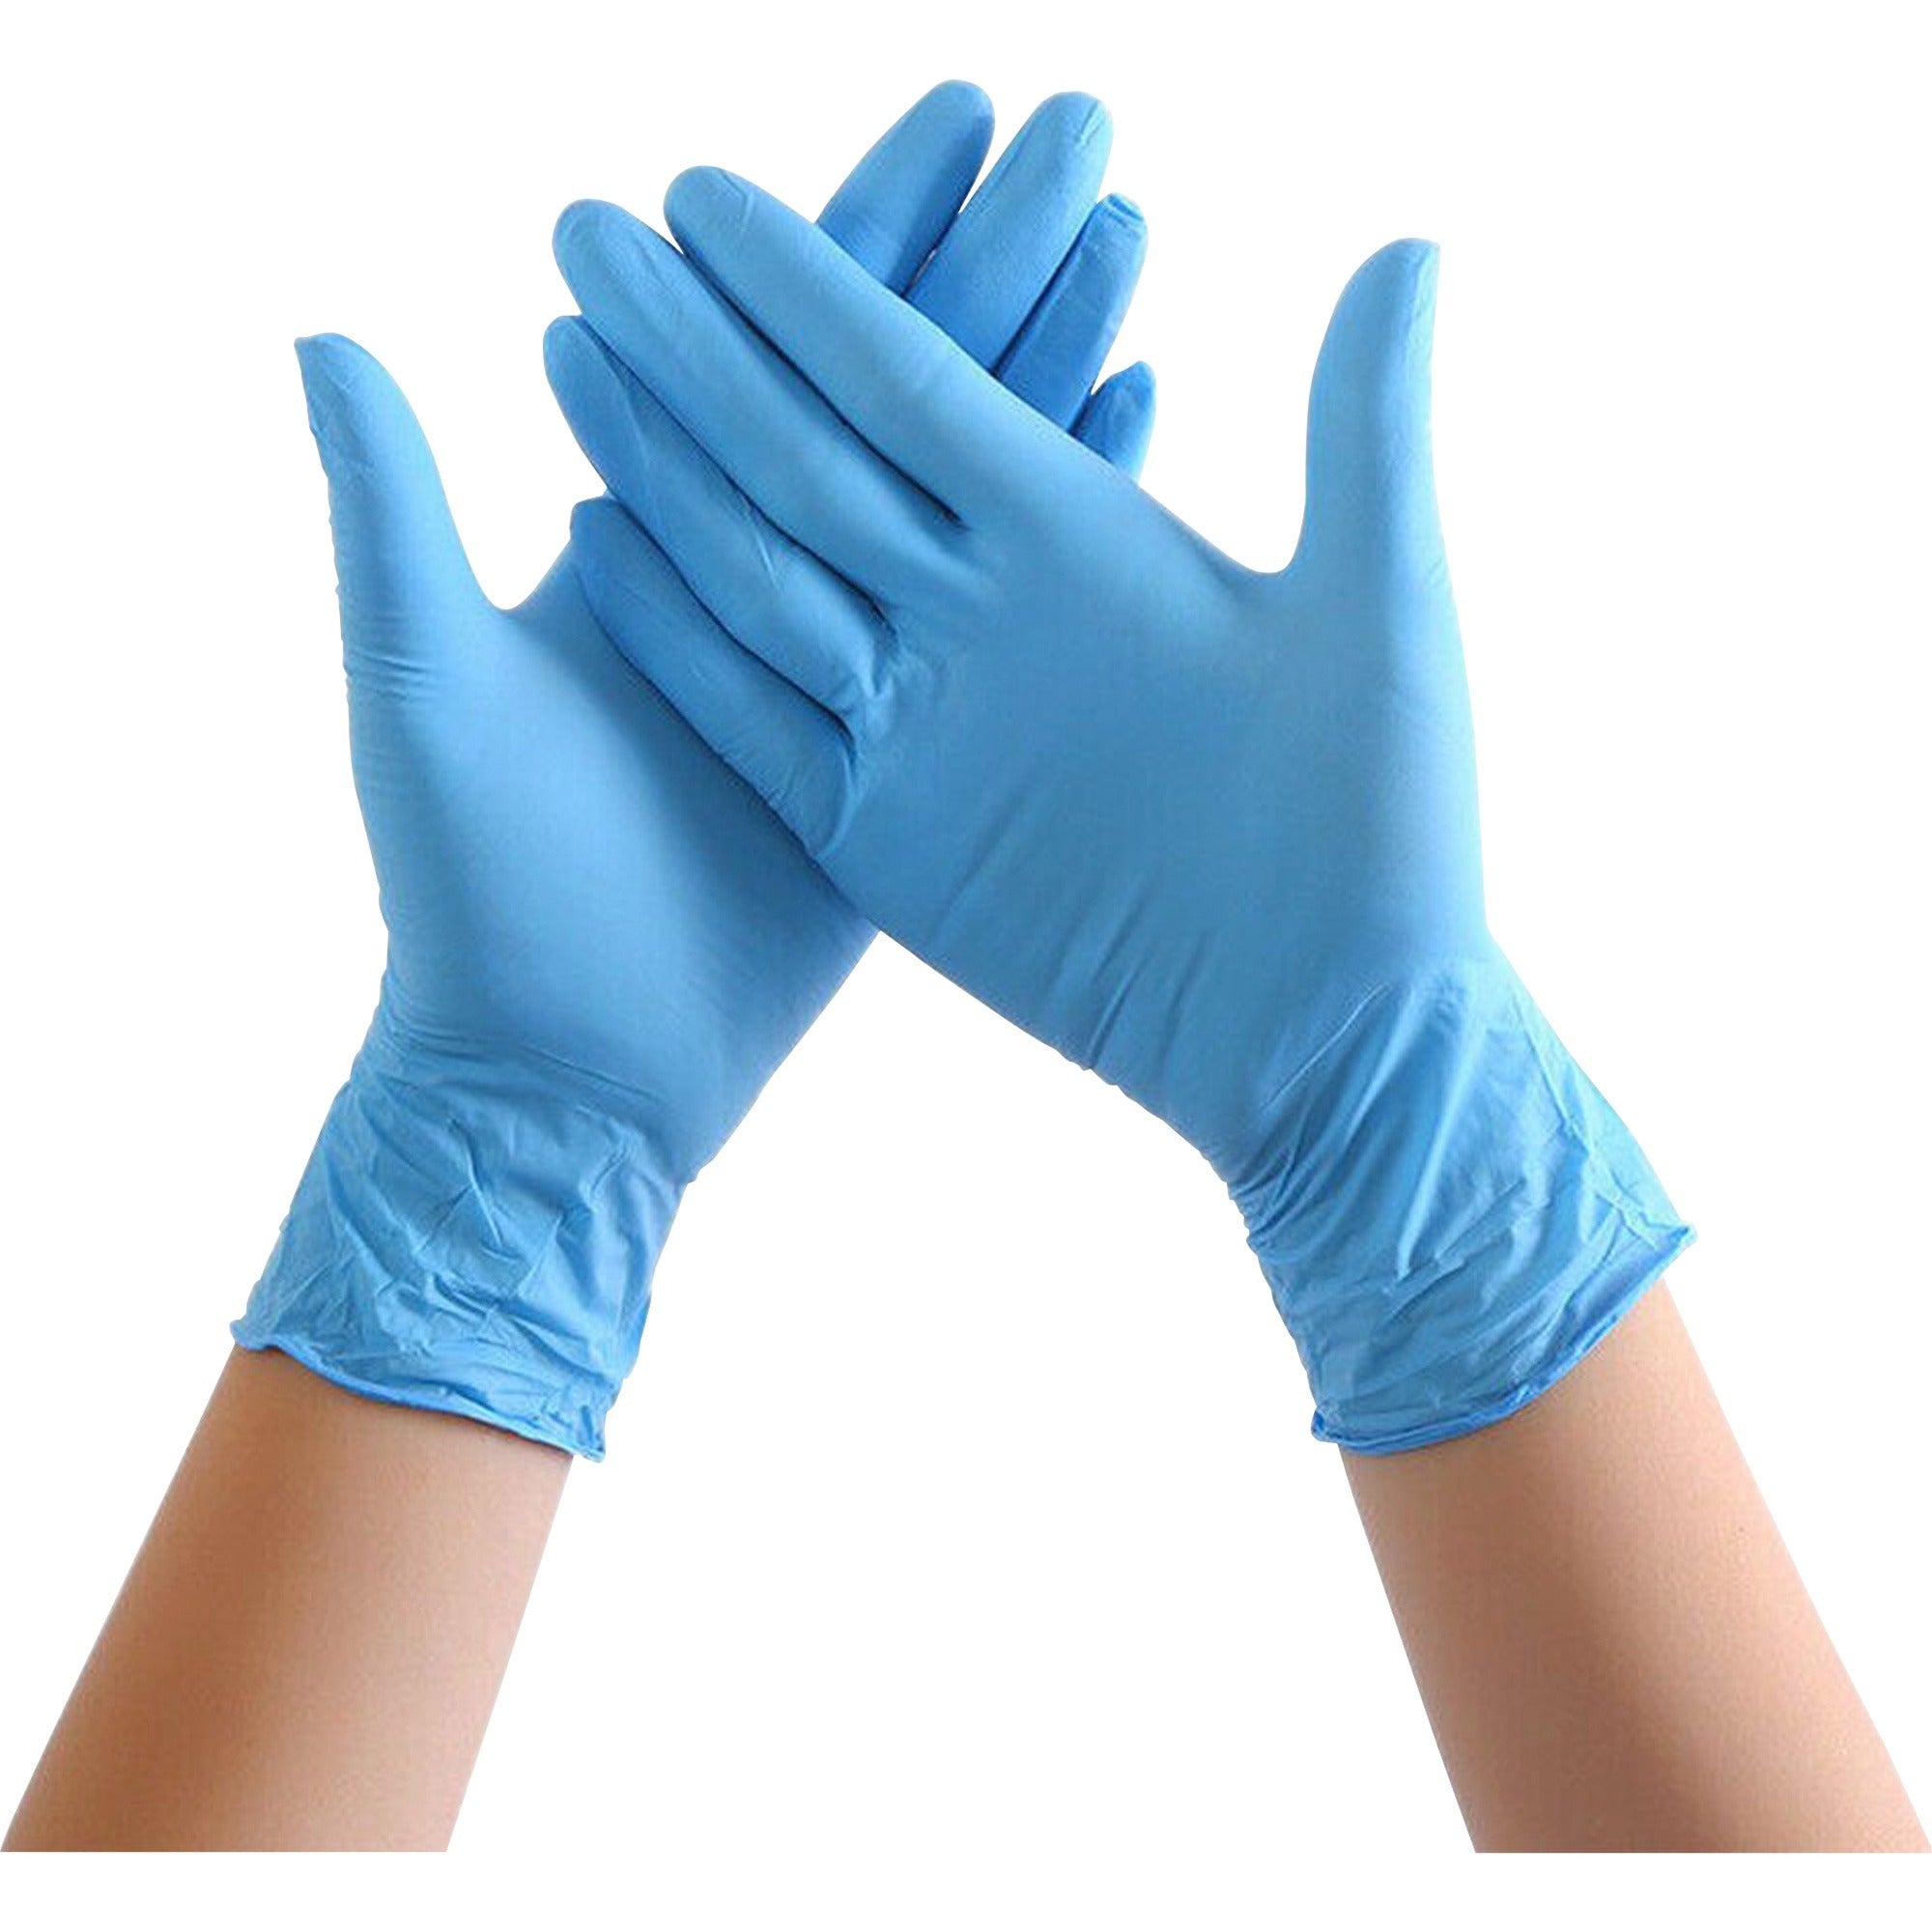 special-buy-examination-gloves-medium-size-blue-textured-fingertip-puncture-resistant-non-sterile-100-box-4-mil-thickness_spzglvntrlm - 1